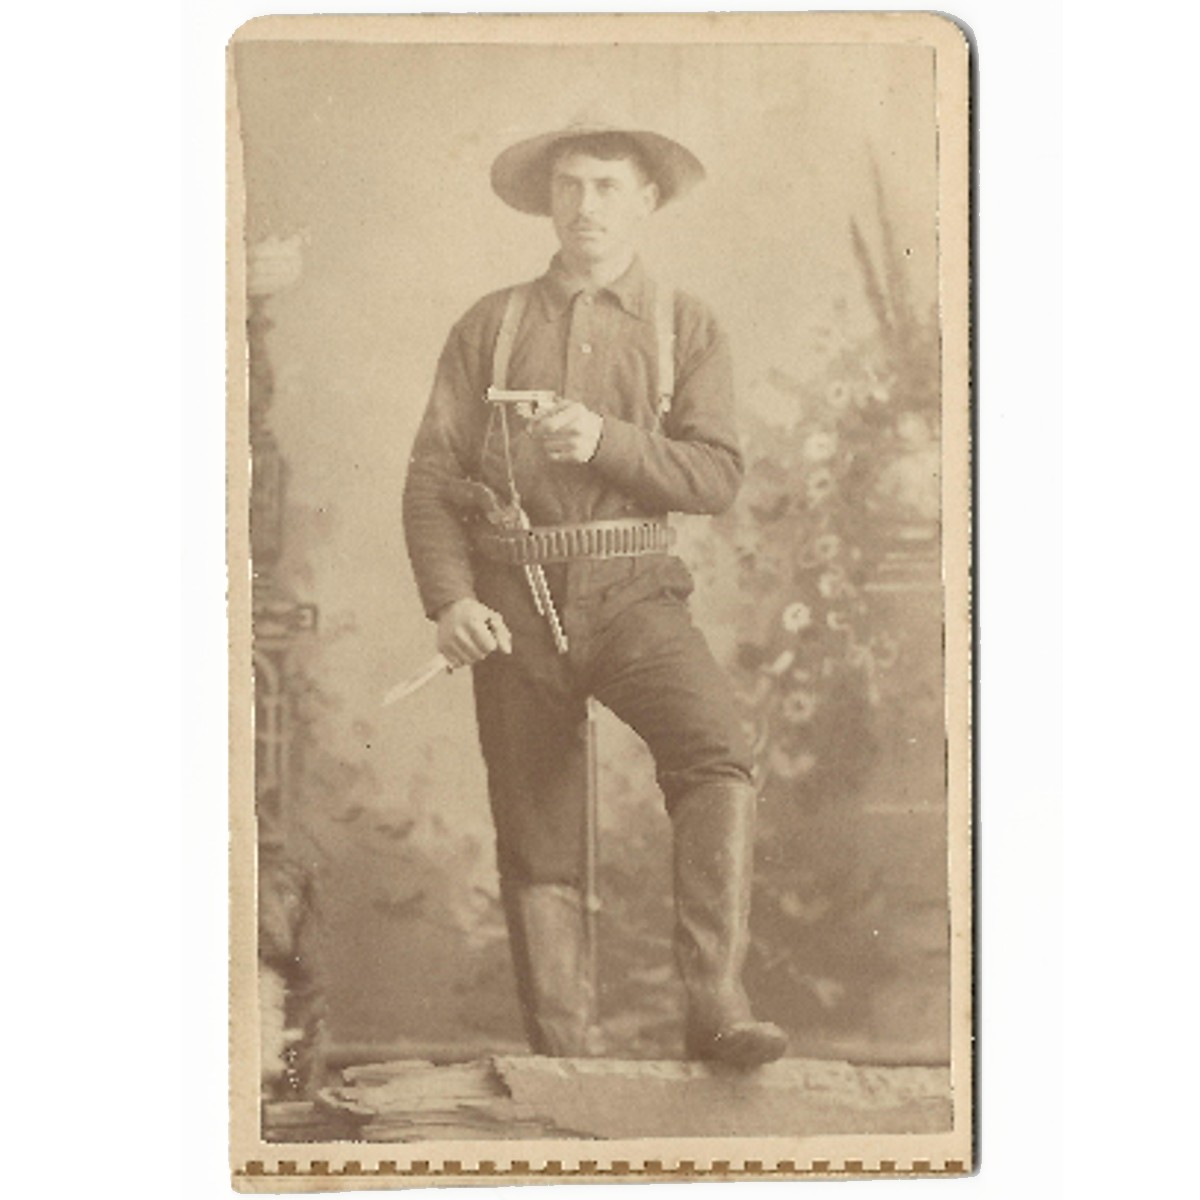 Albumen CDV of a tripled armed soldier - No photographer name